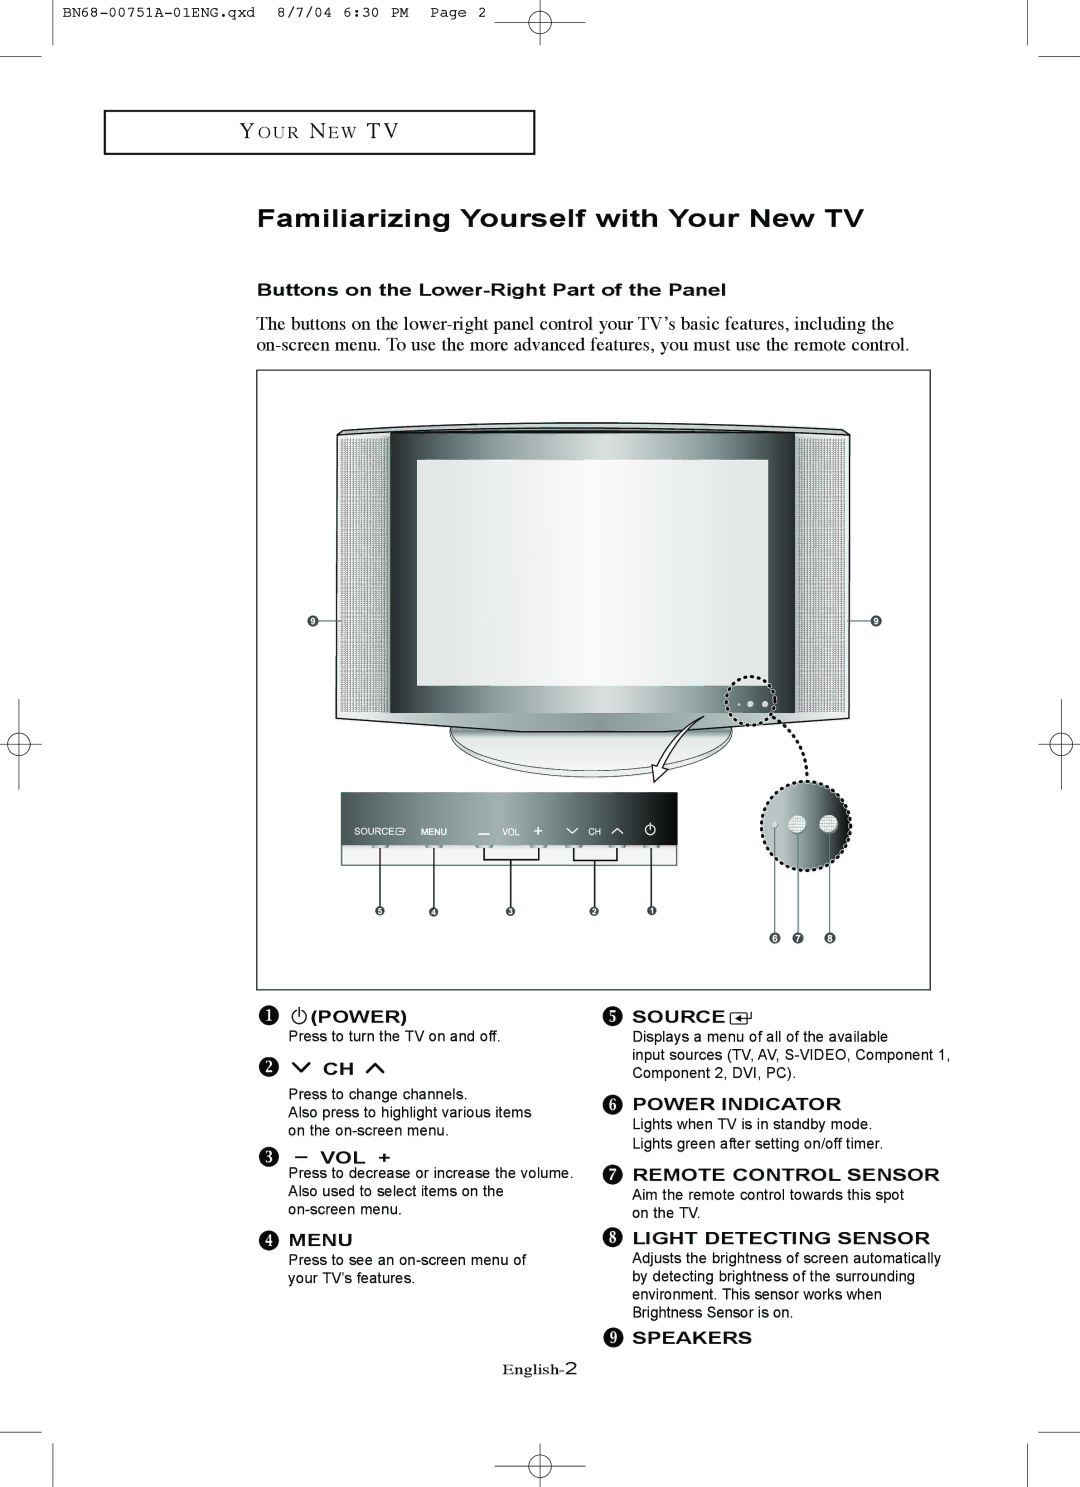 Samsung LN-P327W, LN-P267W Familiarizing Yourself with Your New TV, Buttons on the Lower-Right Part of the Panel, Vol + 